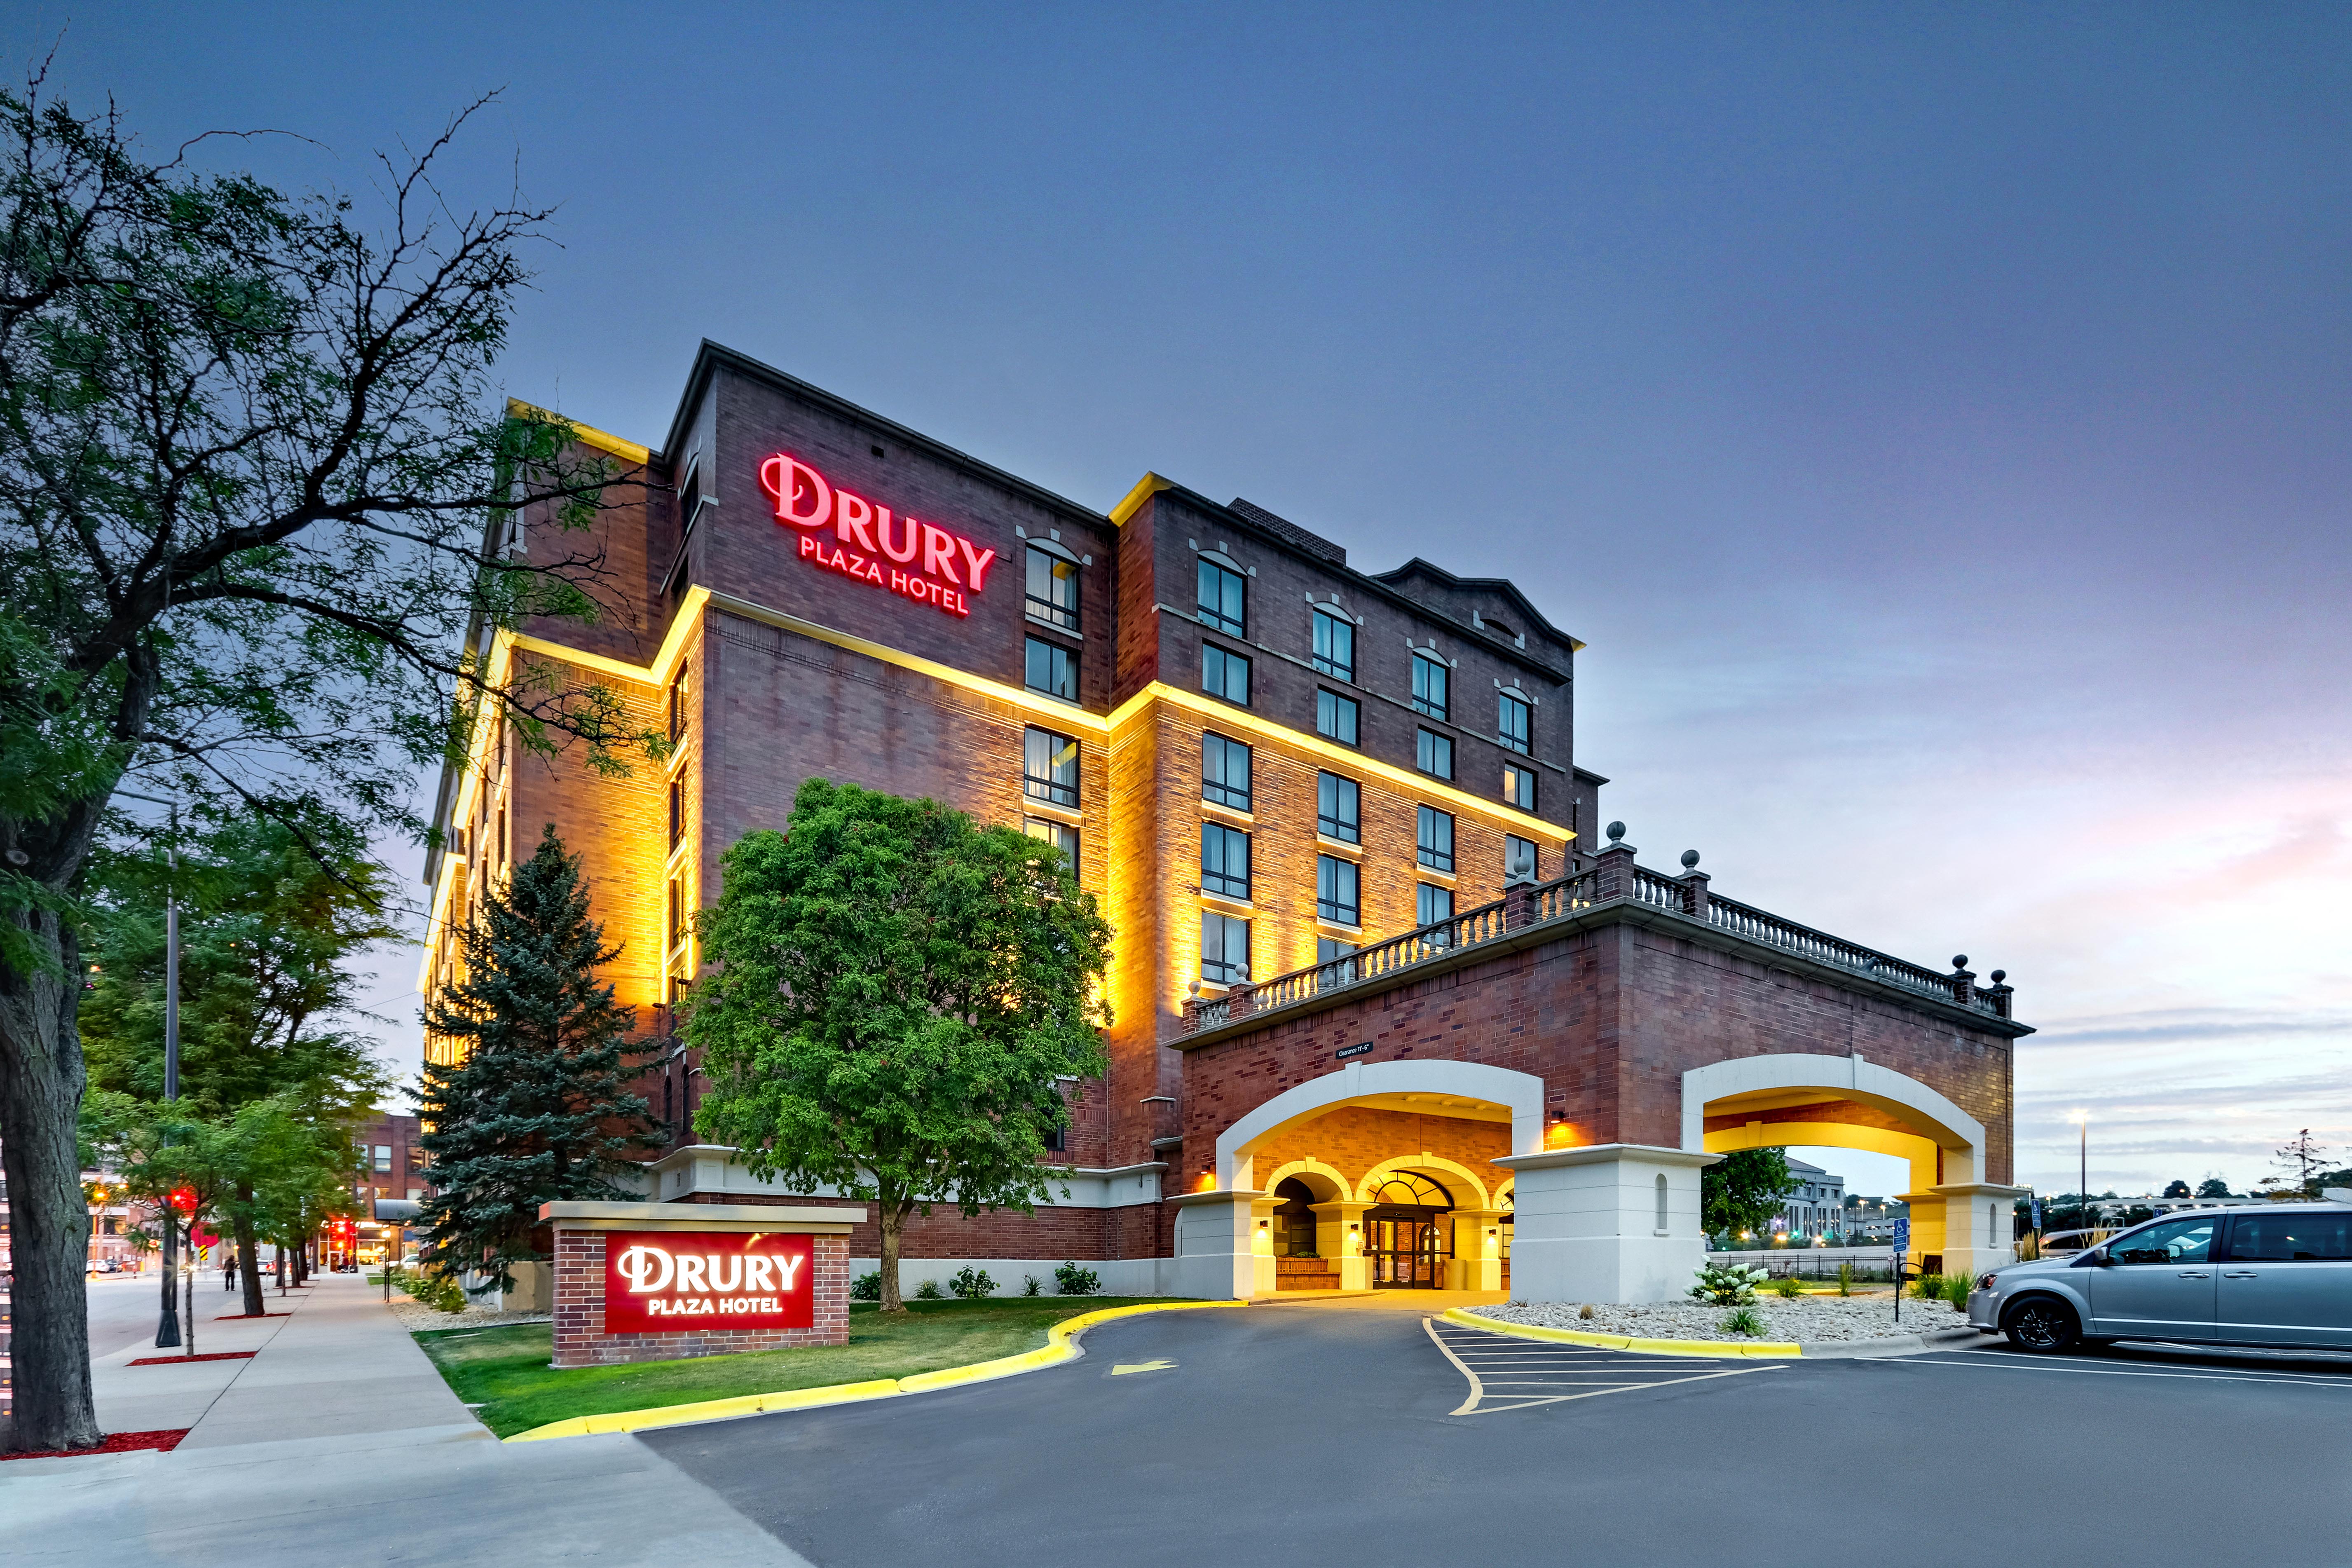 St. Paul Embassy Suites hotel to close in January, rebrand Drury